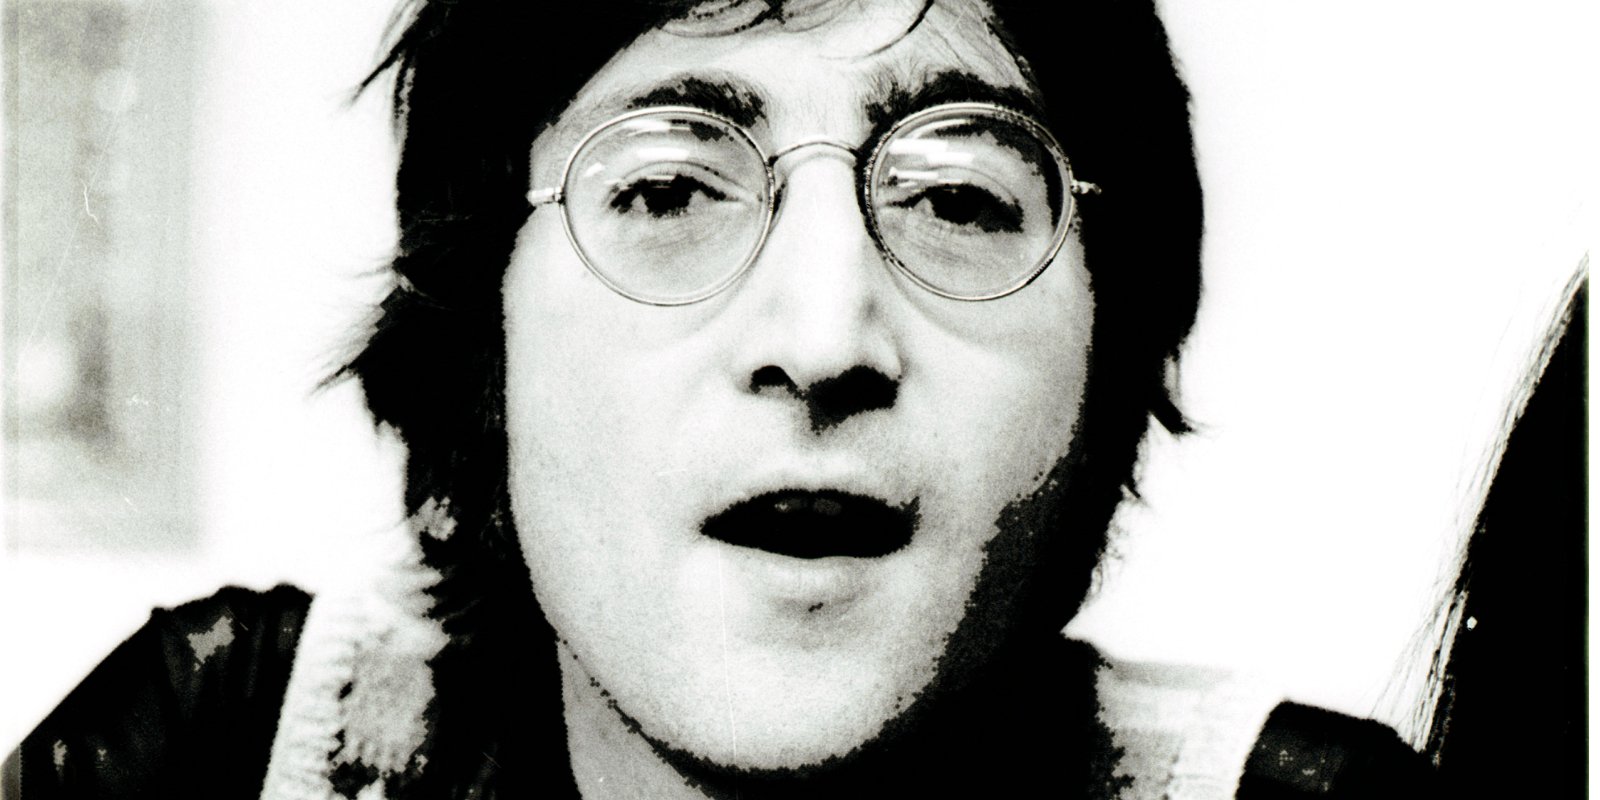 John Lennon photographed in New York City in the mid 1970s.